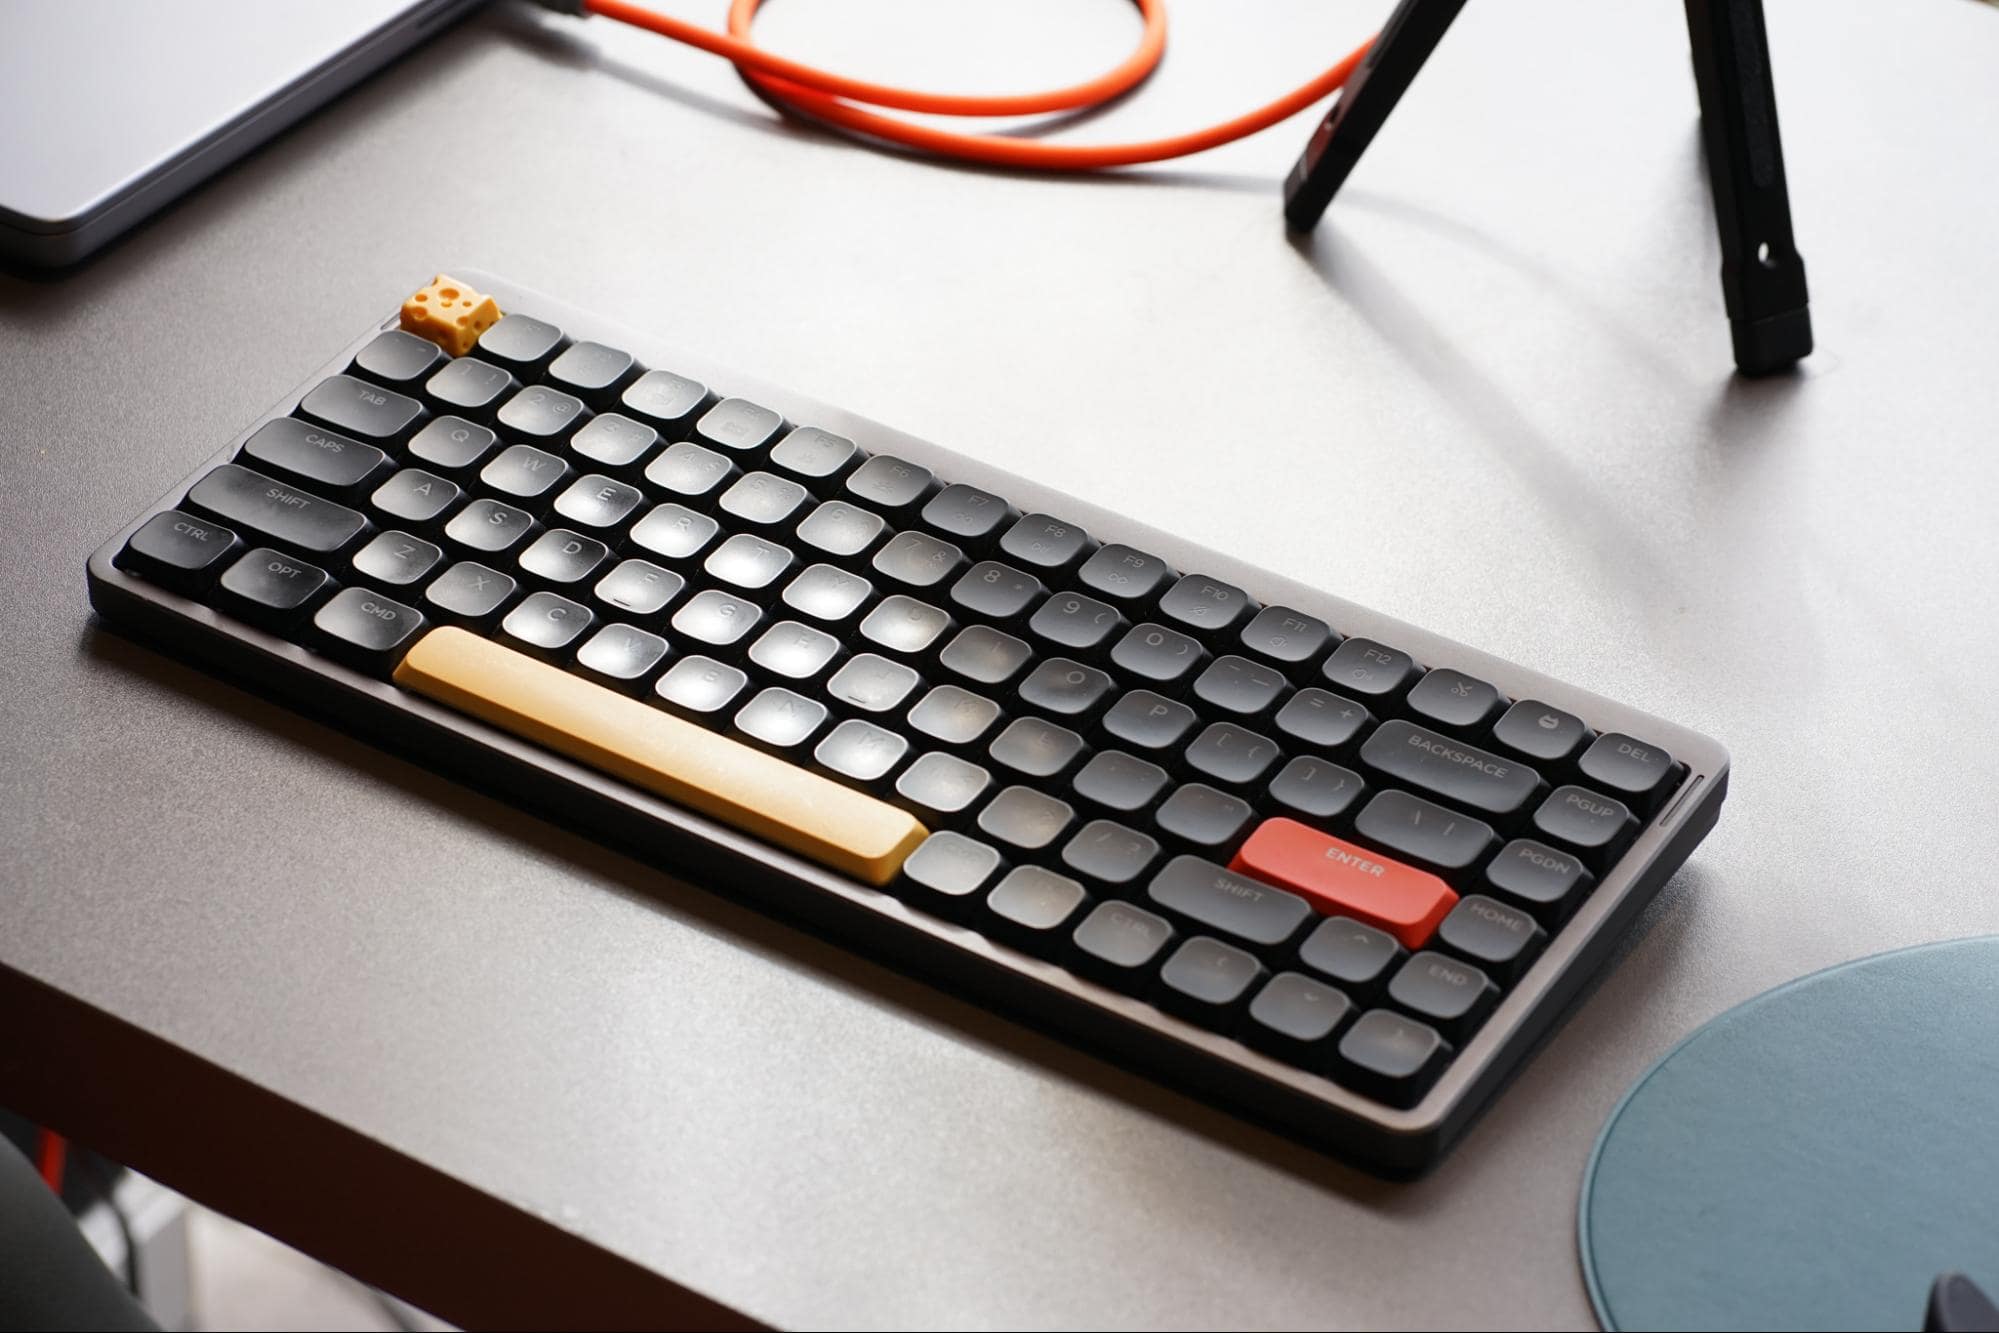 A close-up of a stylish mechanical keyboard with round keys and a distinctive yellow spacebar and red enter key, placed on a modern desk setup